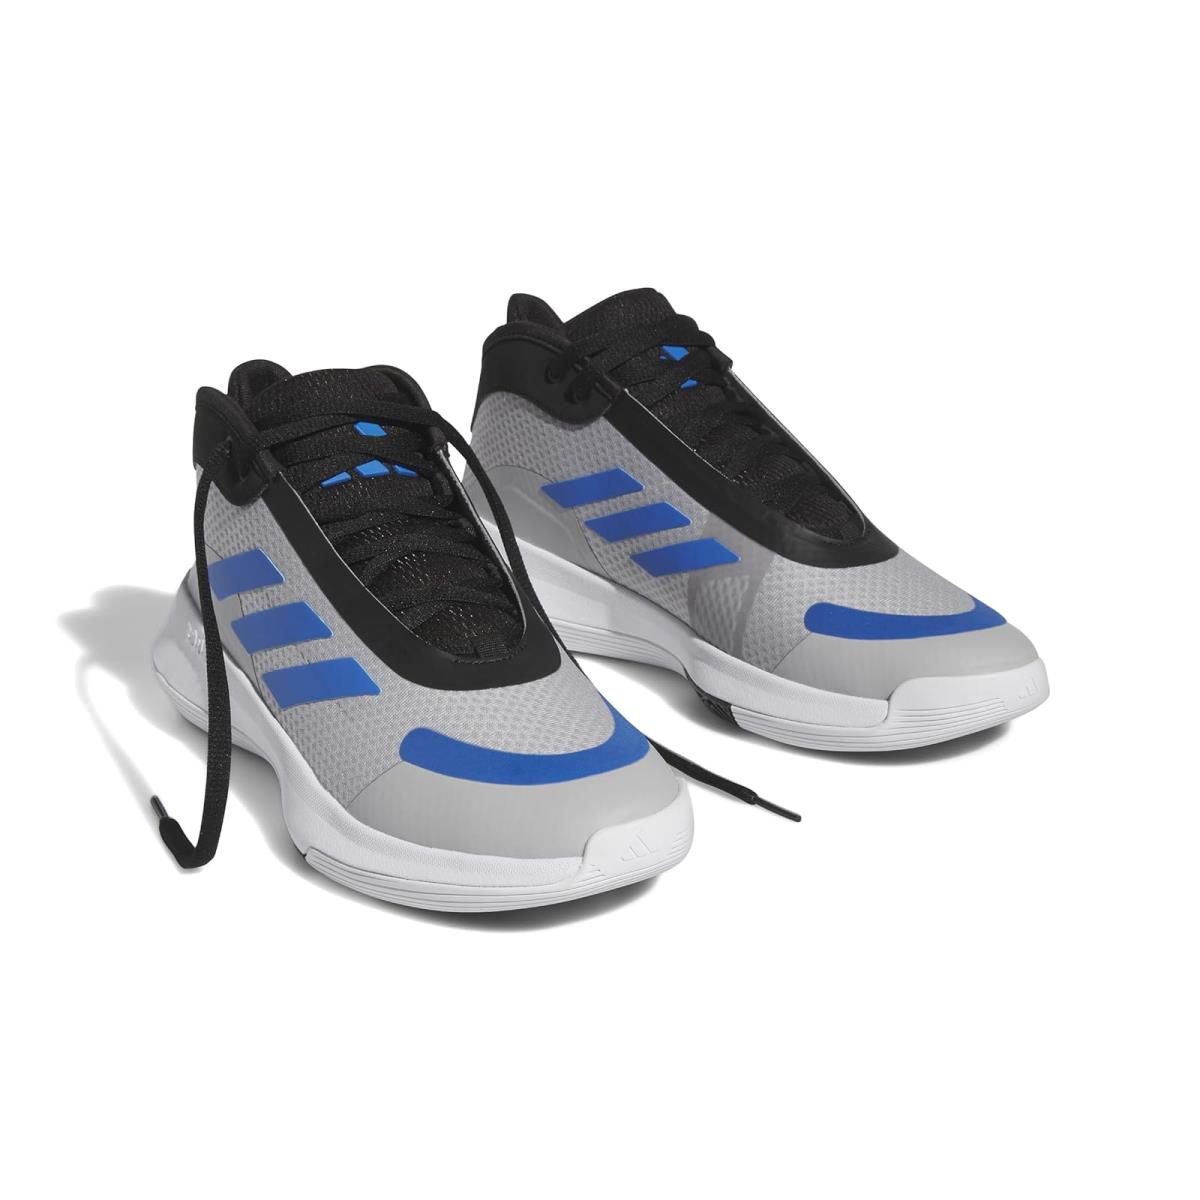 Unisex Sneakers Athletic Shoes Adidas Bounce Legends Grey Two/Bright Royal/Core Black